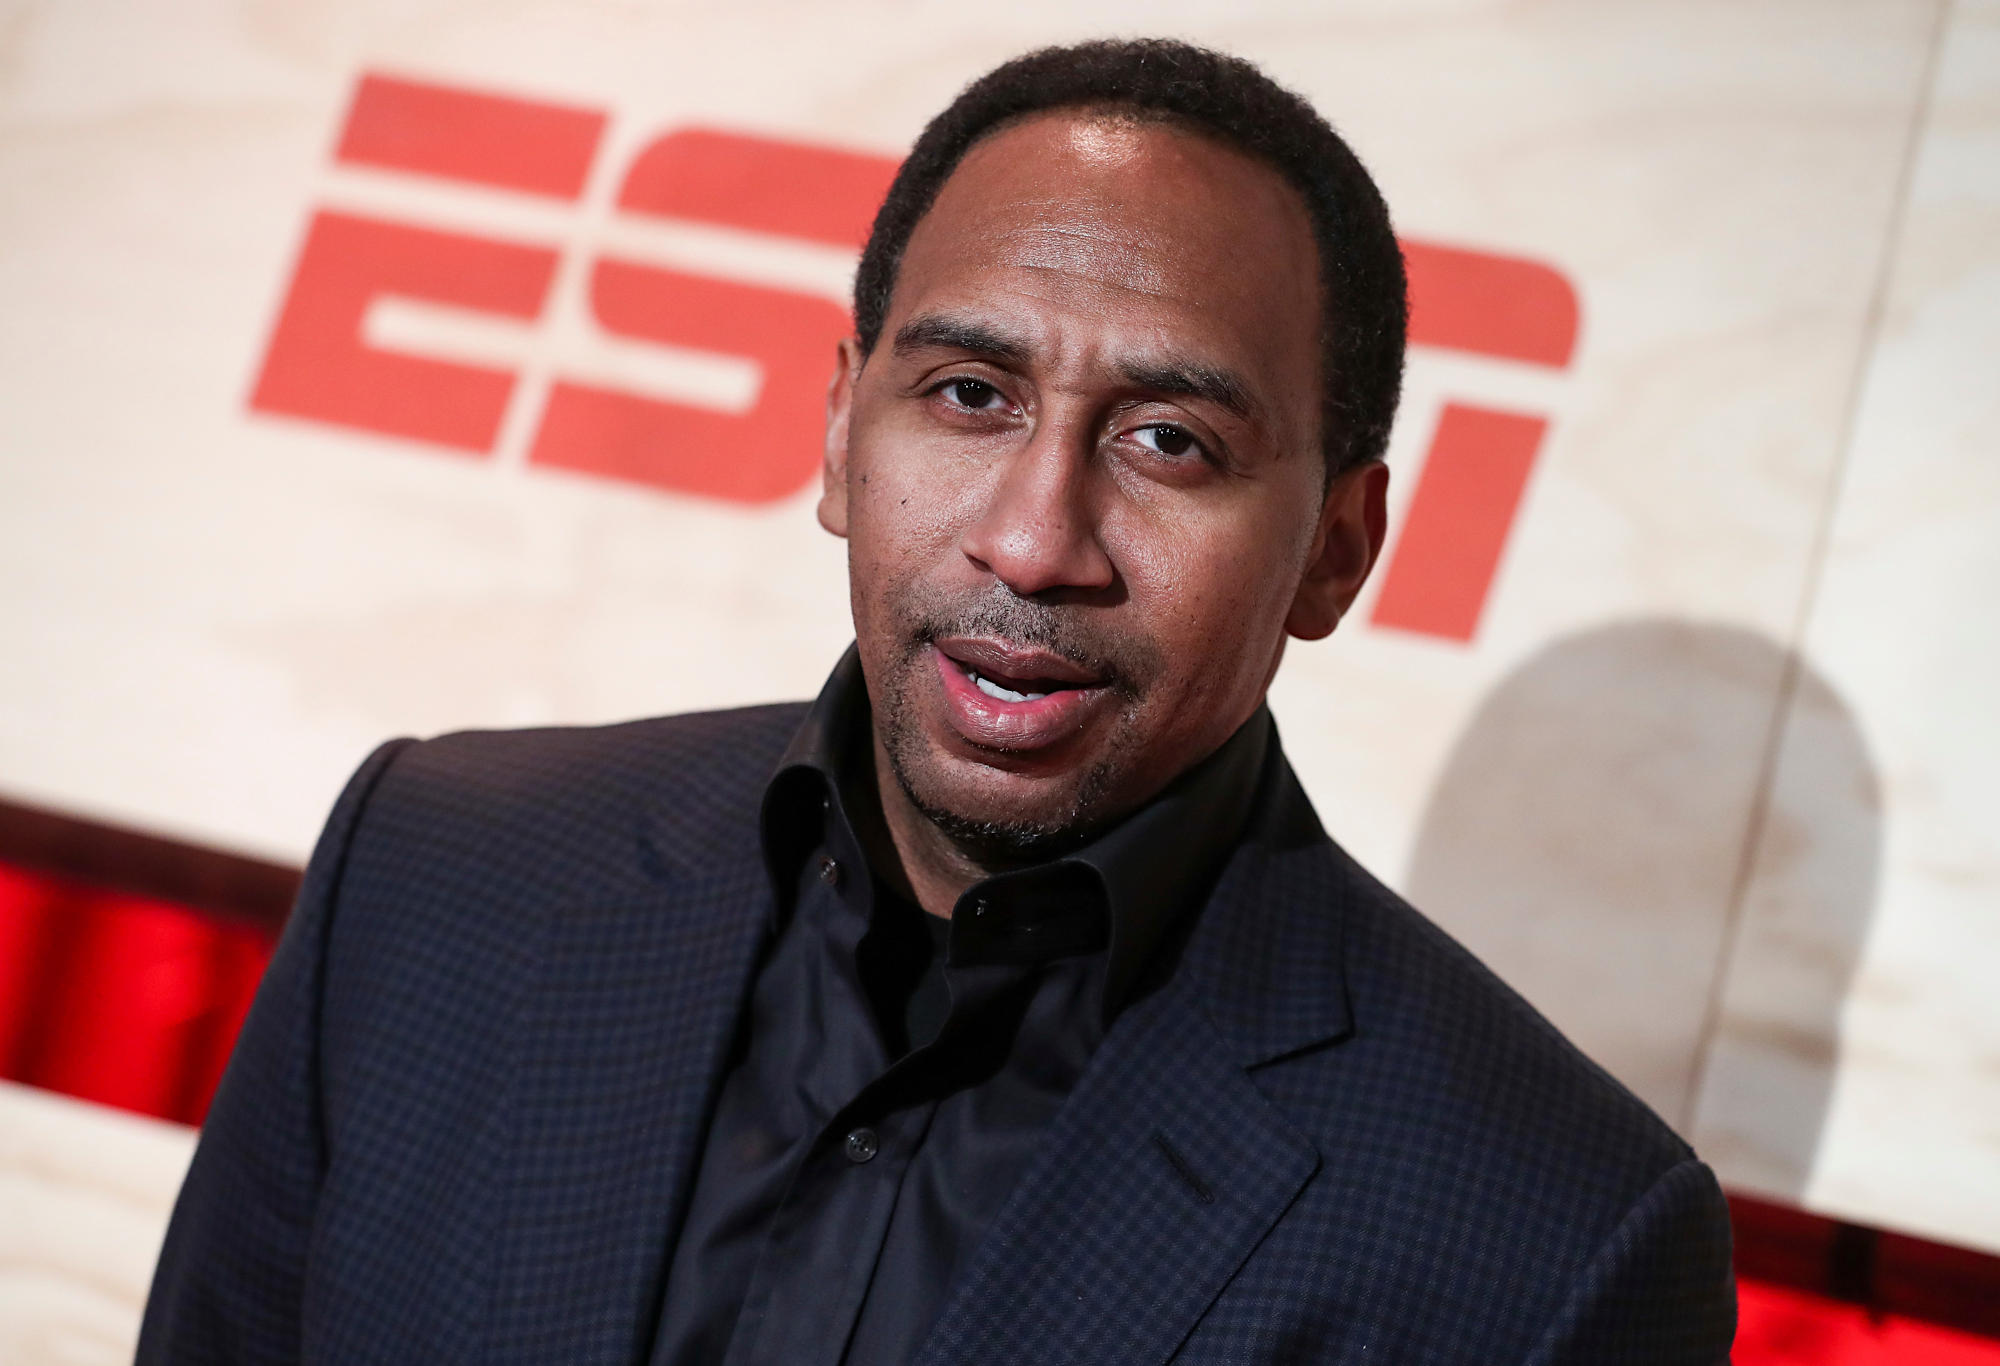 Stephen A. Smith at an ESPN event